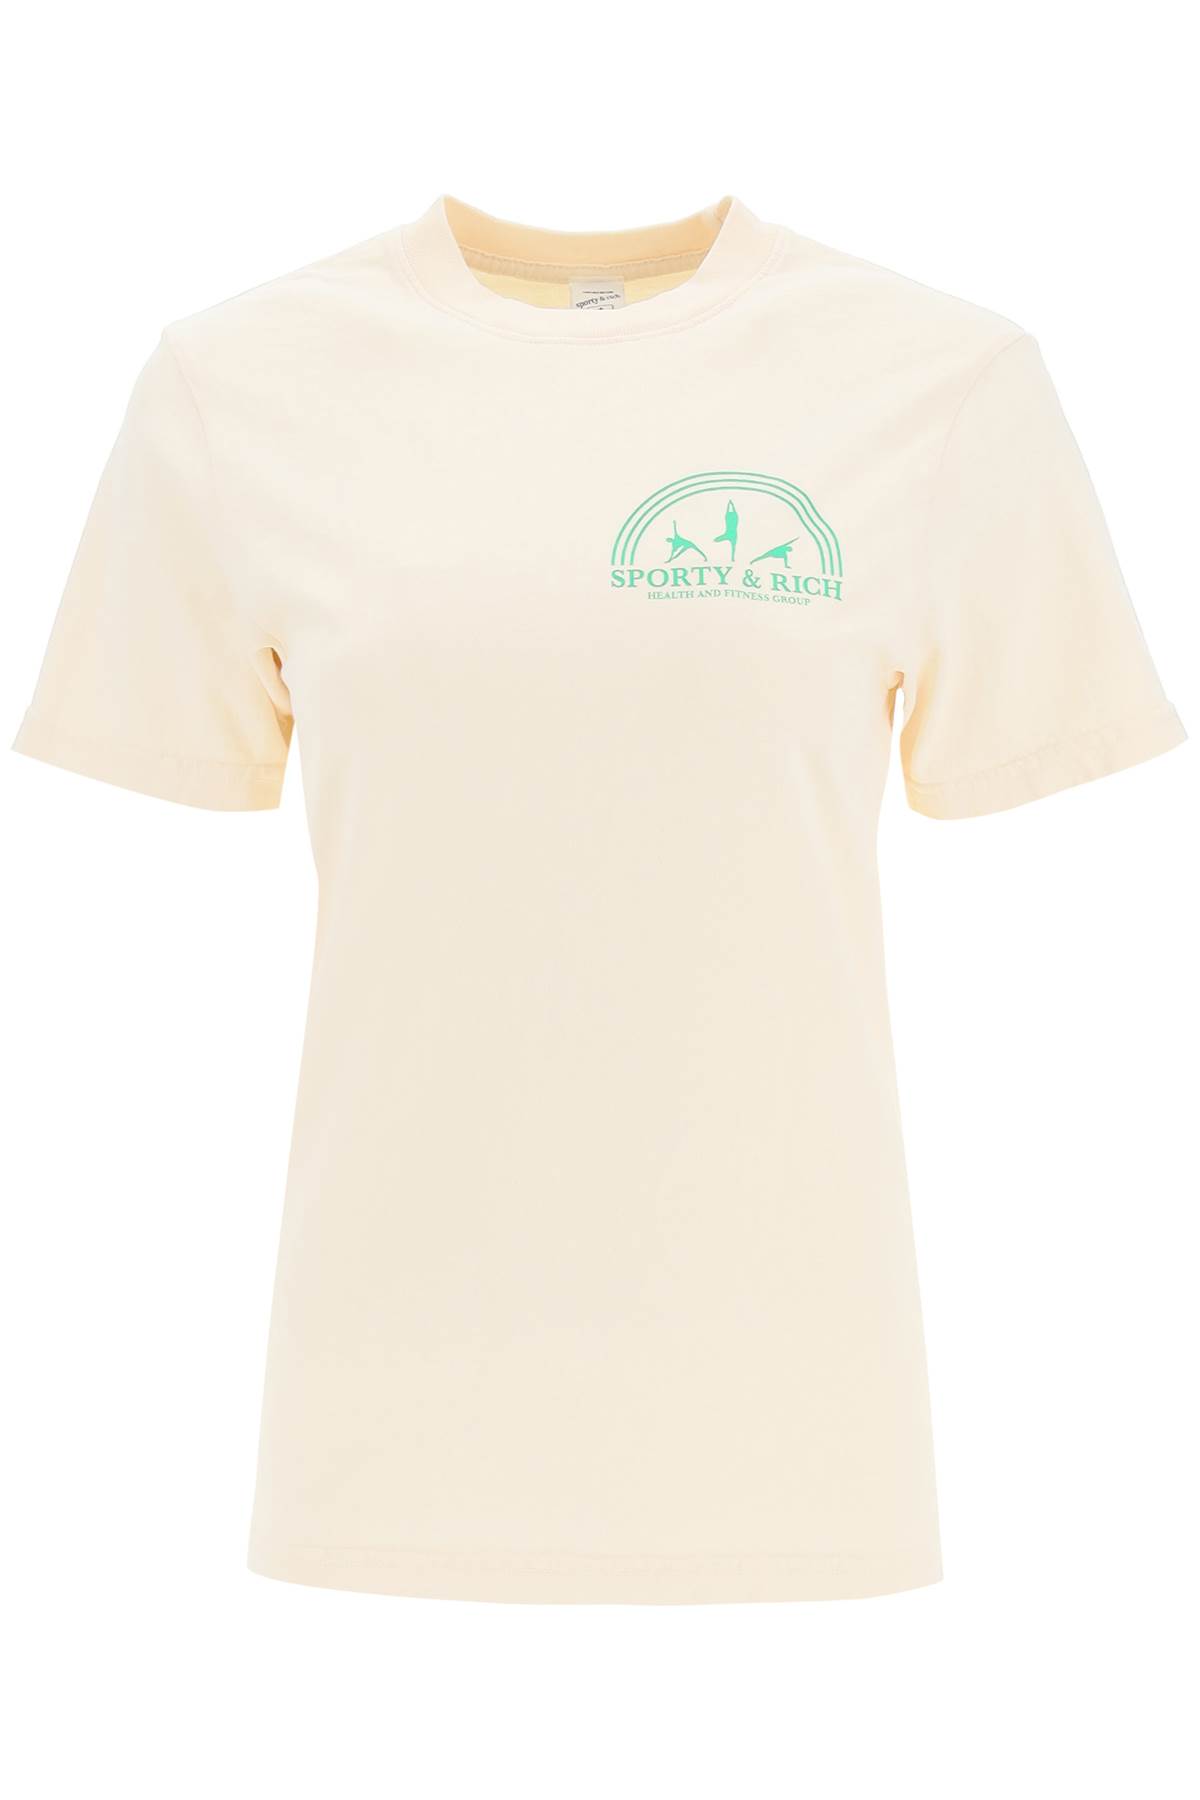 Sporty & Rich Fitness Group T-shirt